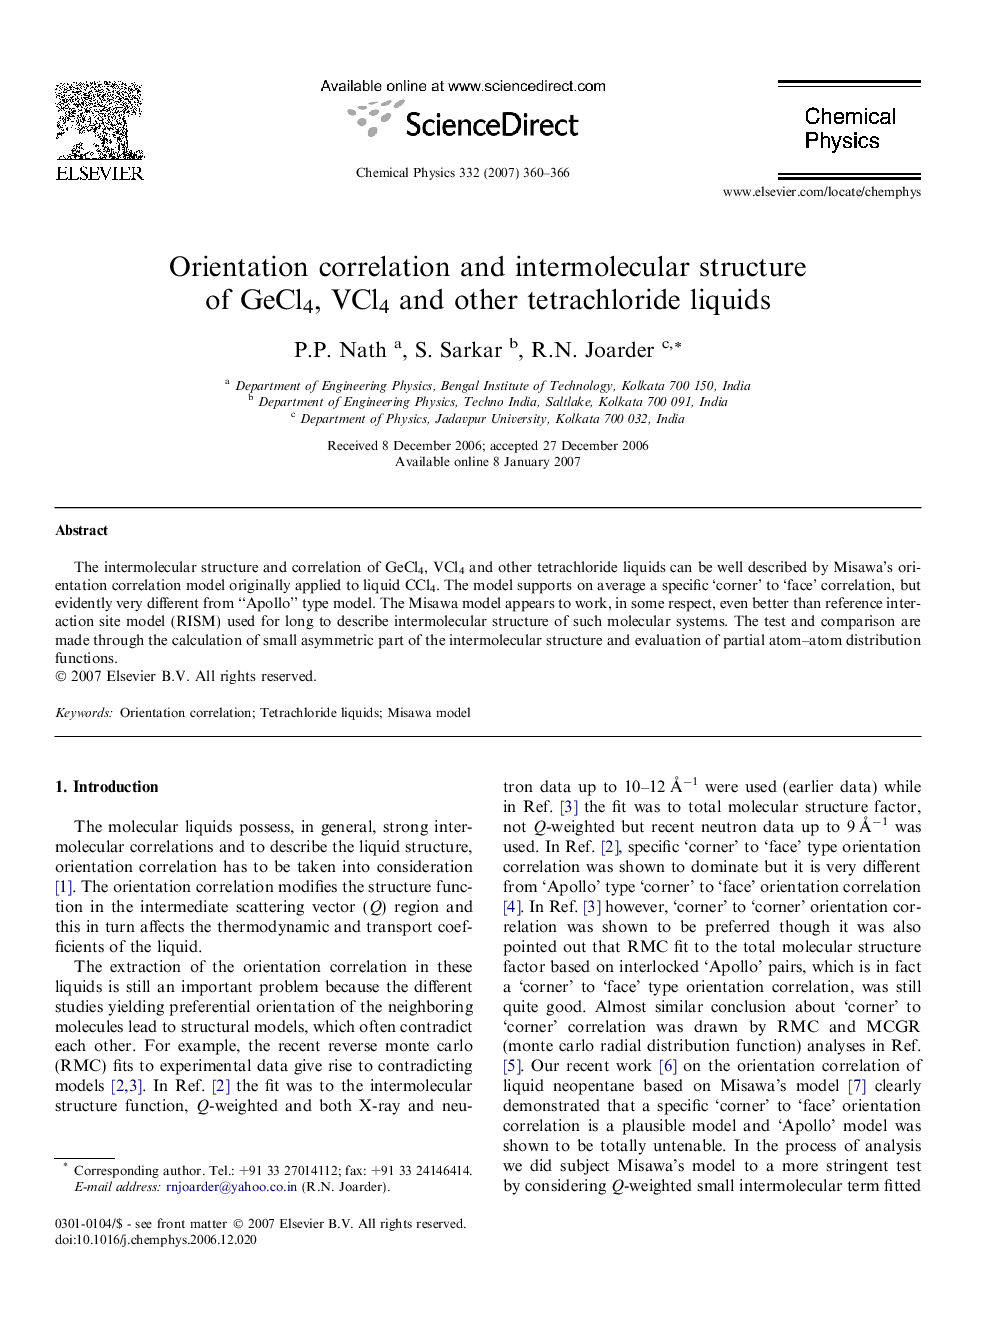 Orientation correlation and intermolecular structure of GeCl4, VCl4 and other tetrachloride liquids